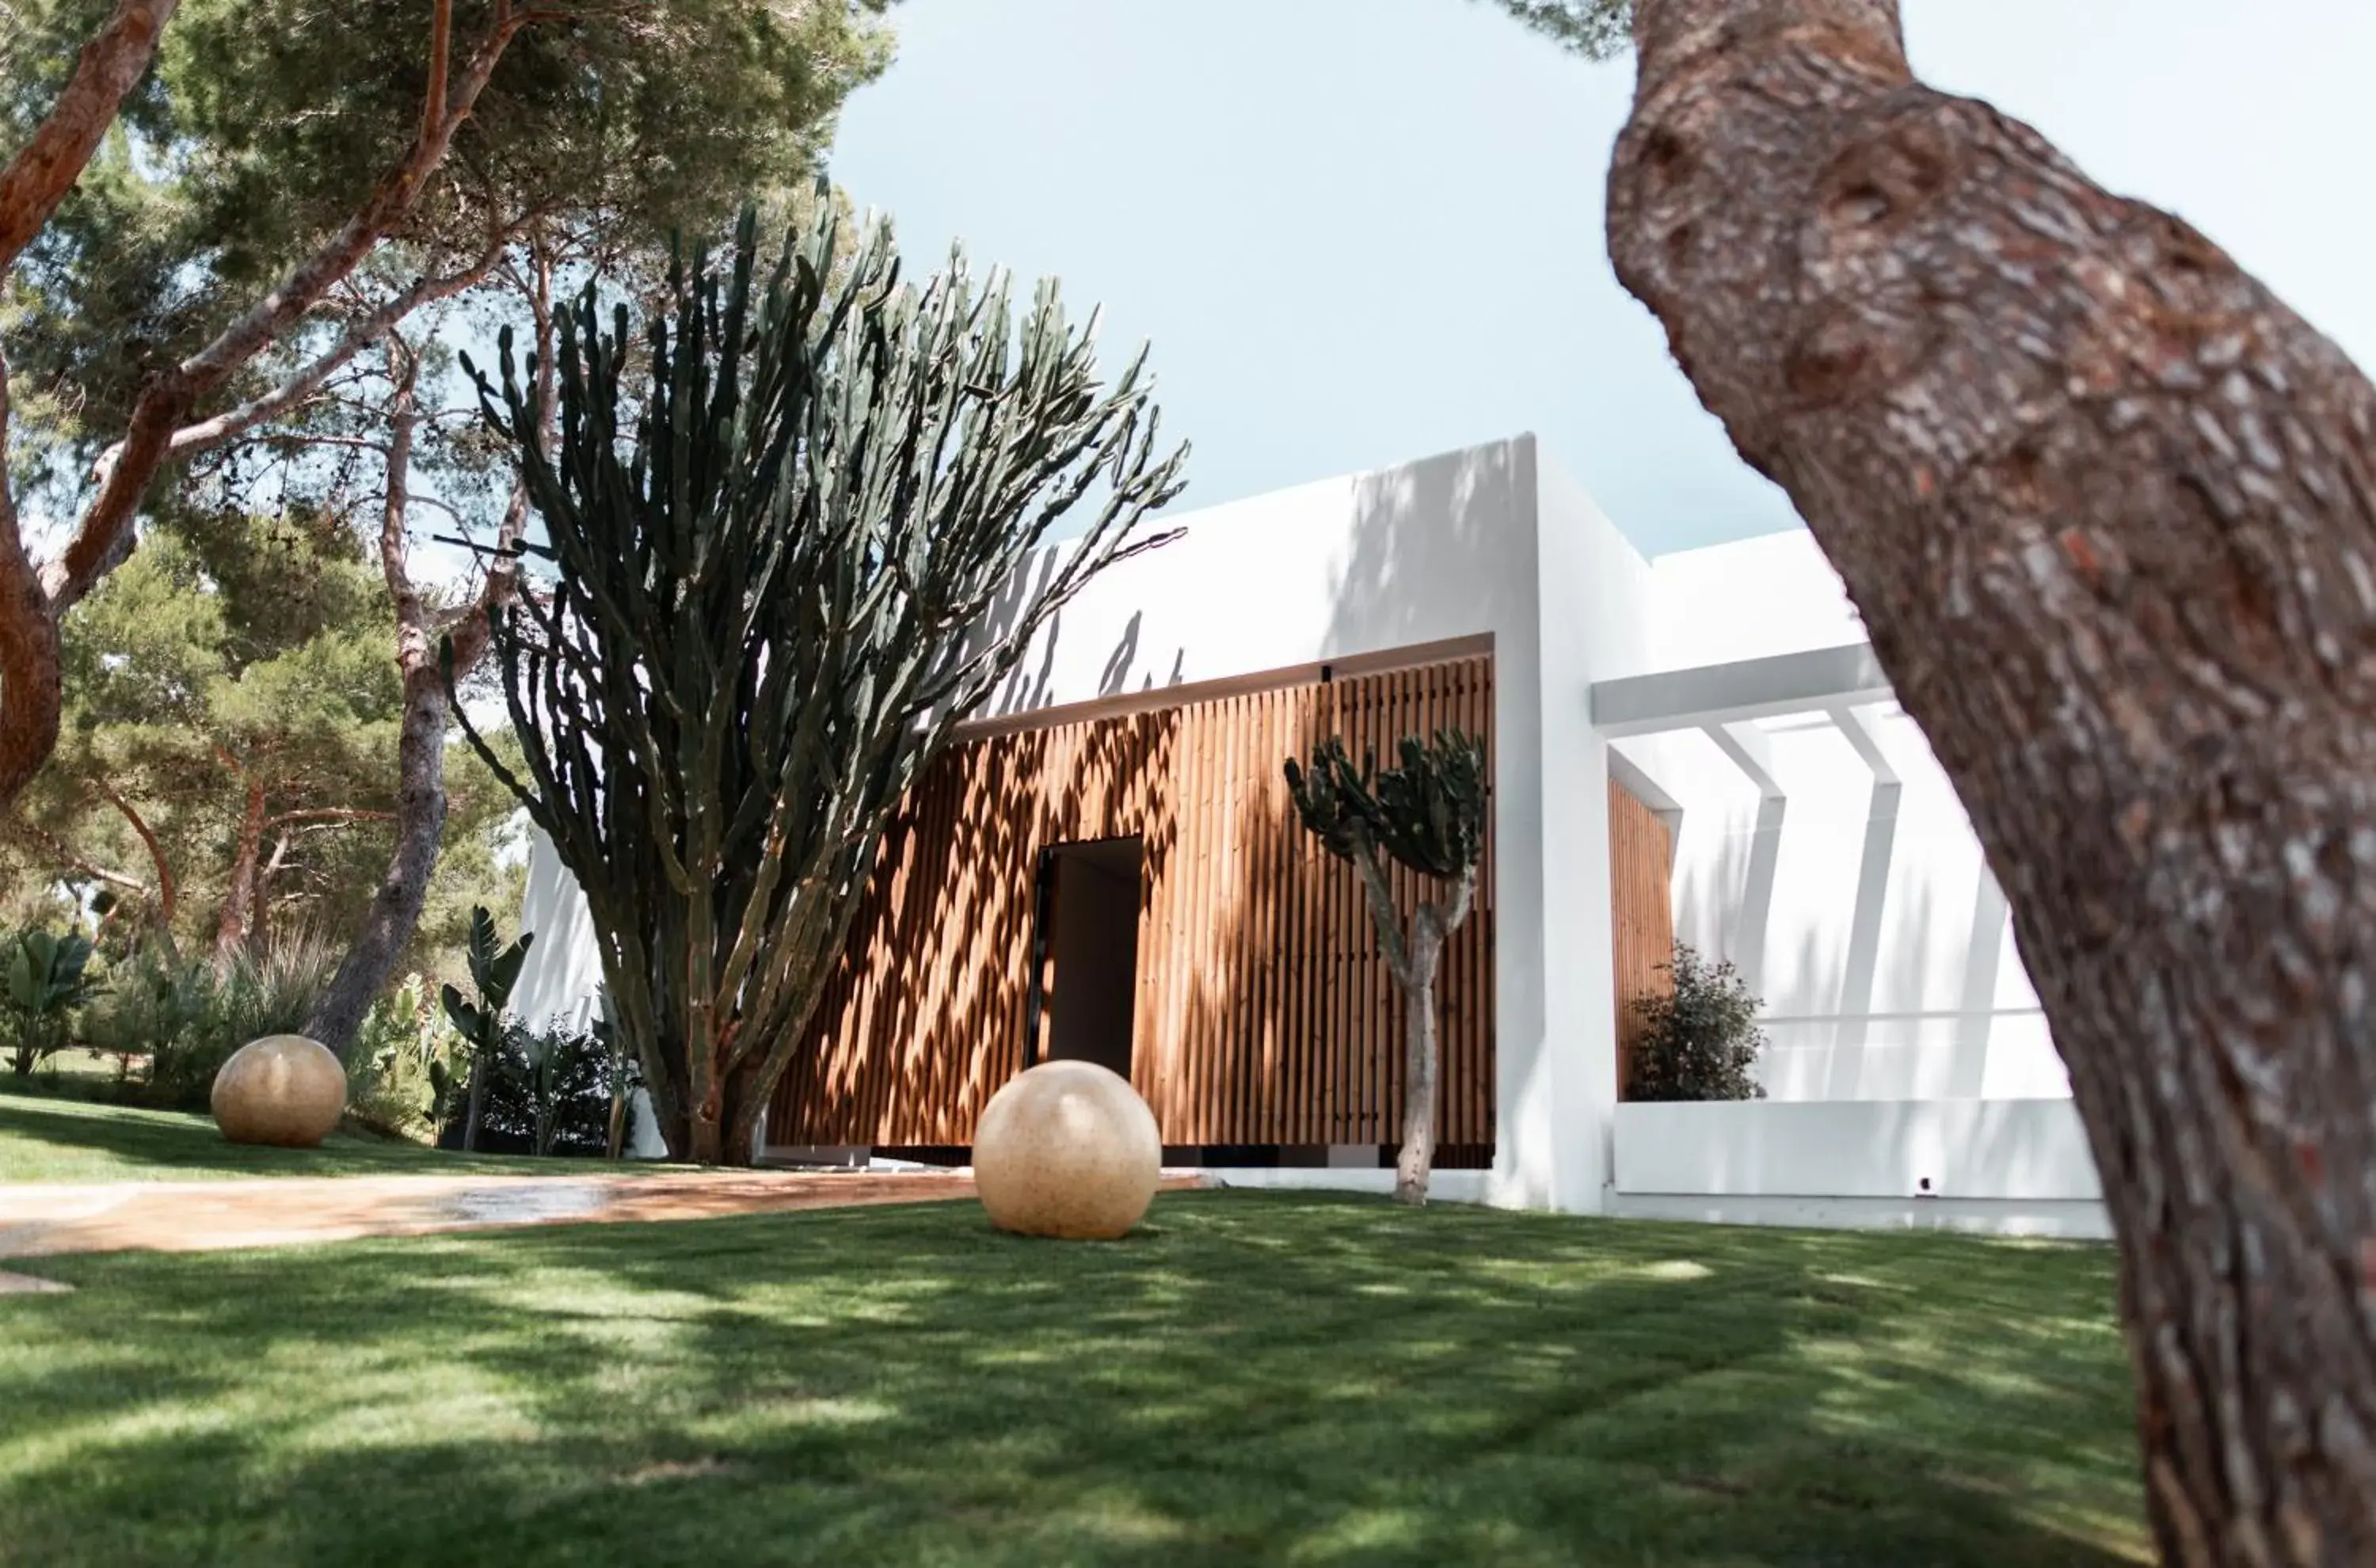 Property Building in Destino Pacha Ibiza - Entrance to Pacha Club Included